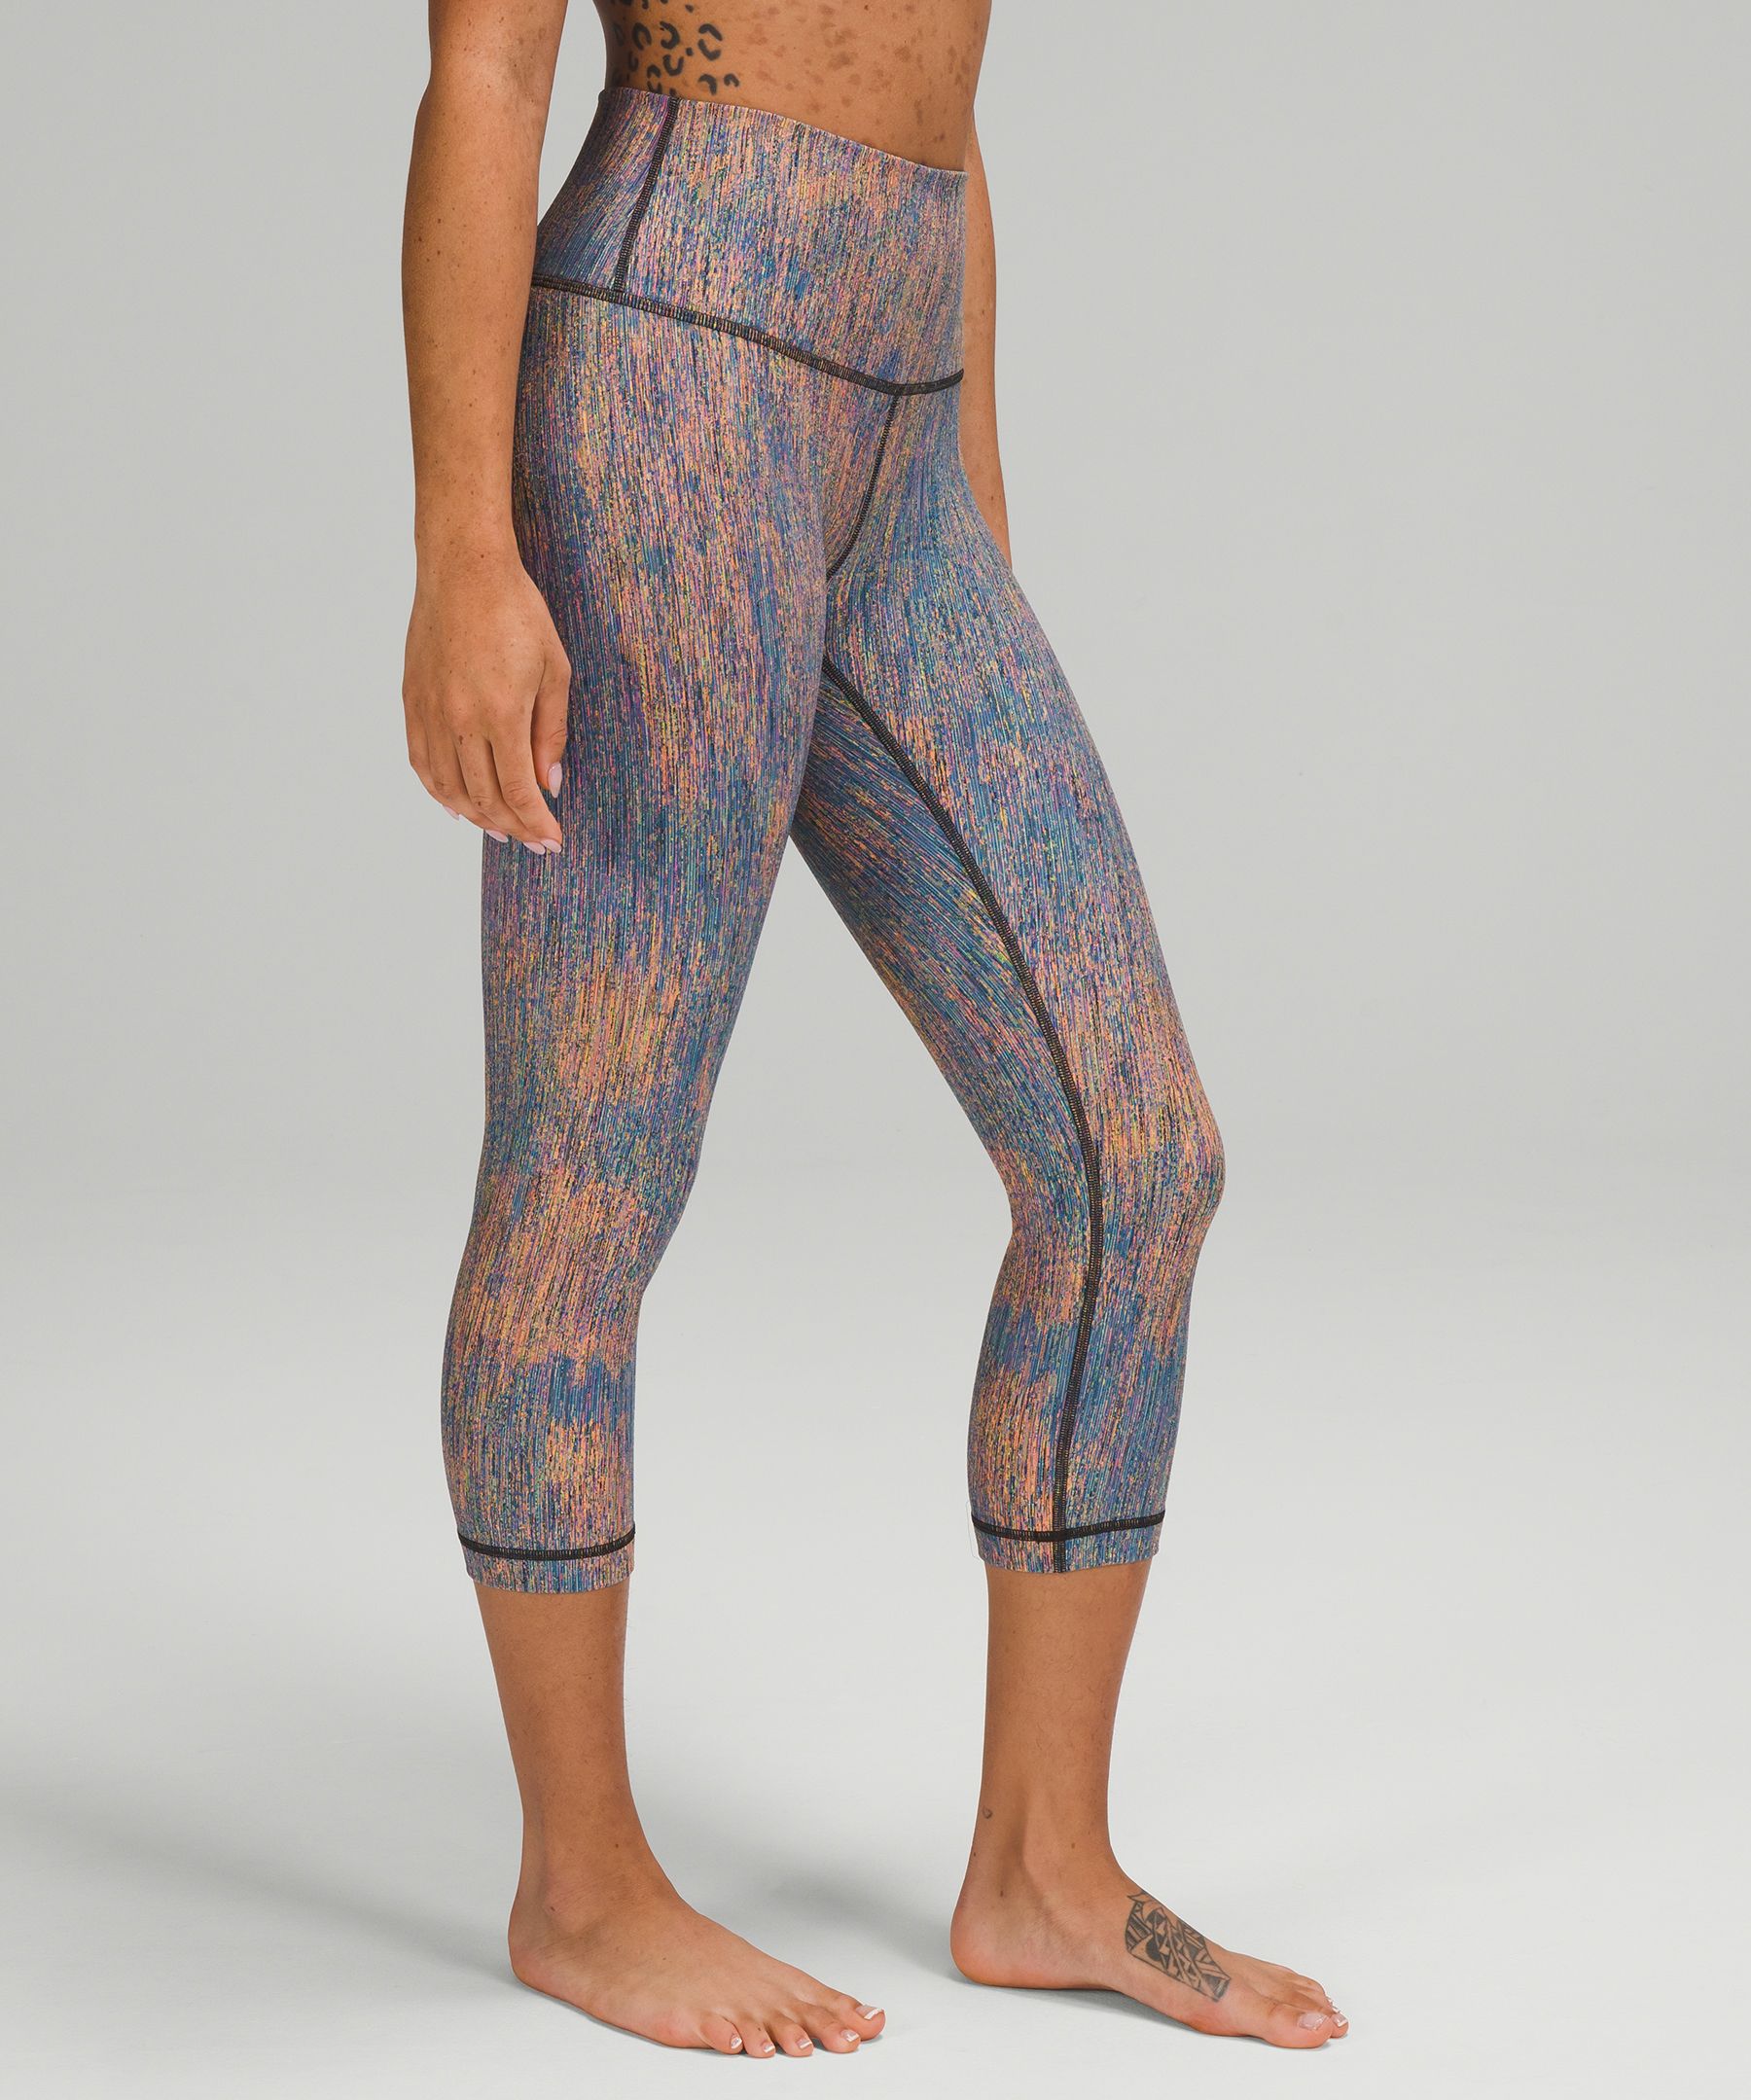 Lululemon Wunder Under High-rise Crop 21" *luxtreme In Spectral Fusion Jacquard Autumn Red Teal Lagoon